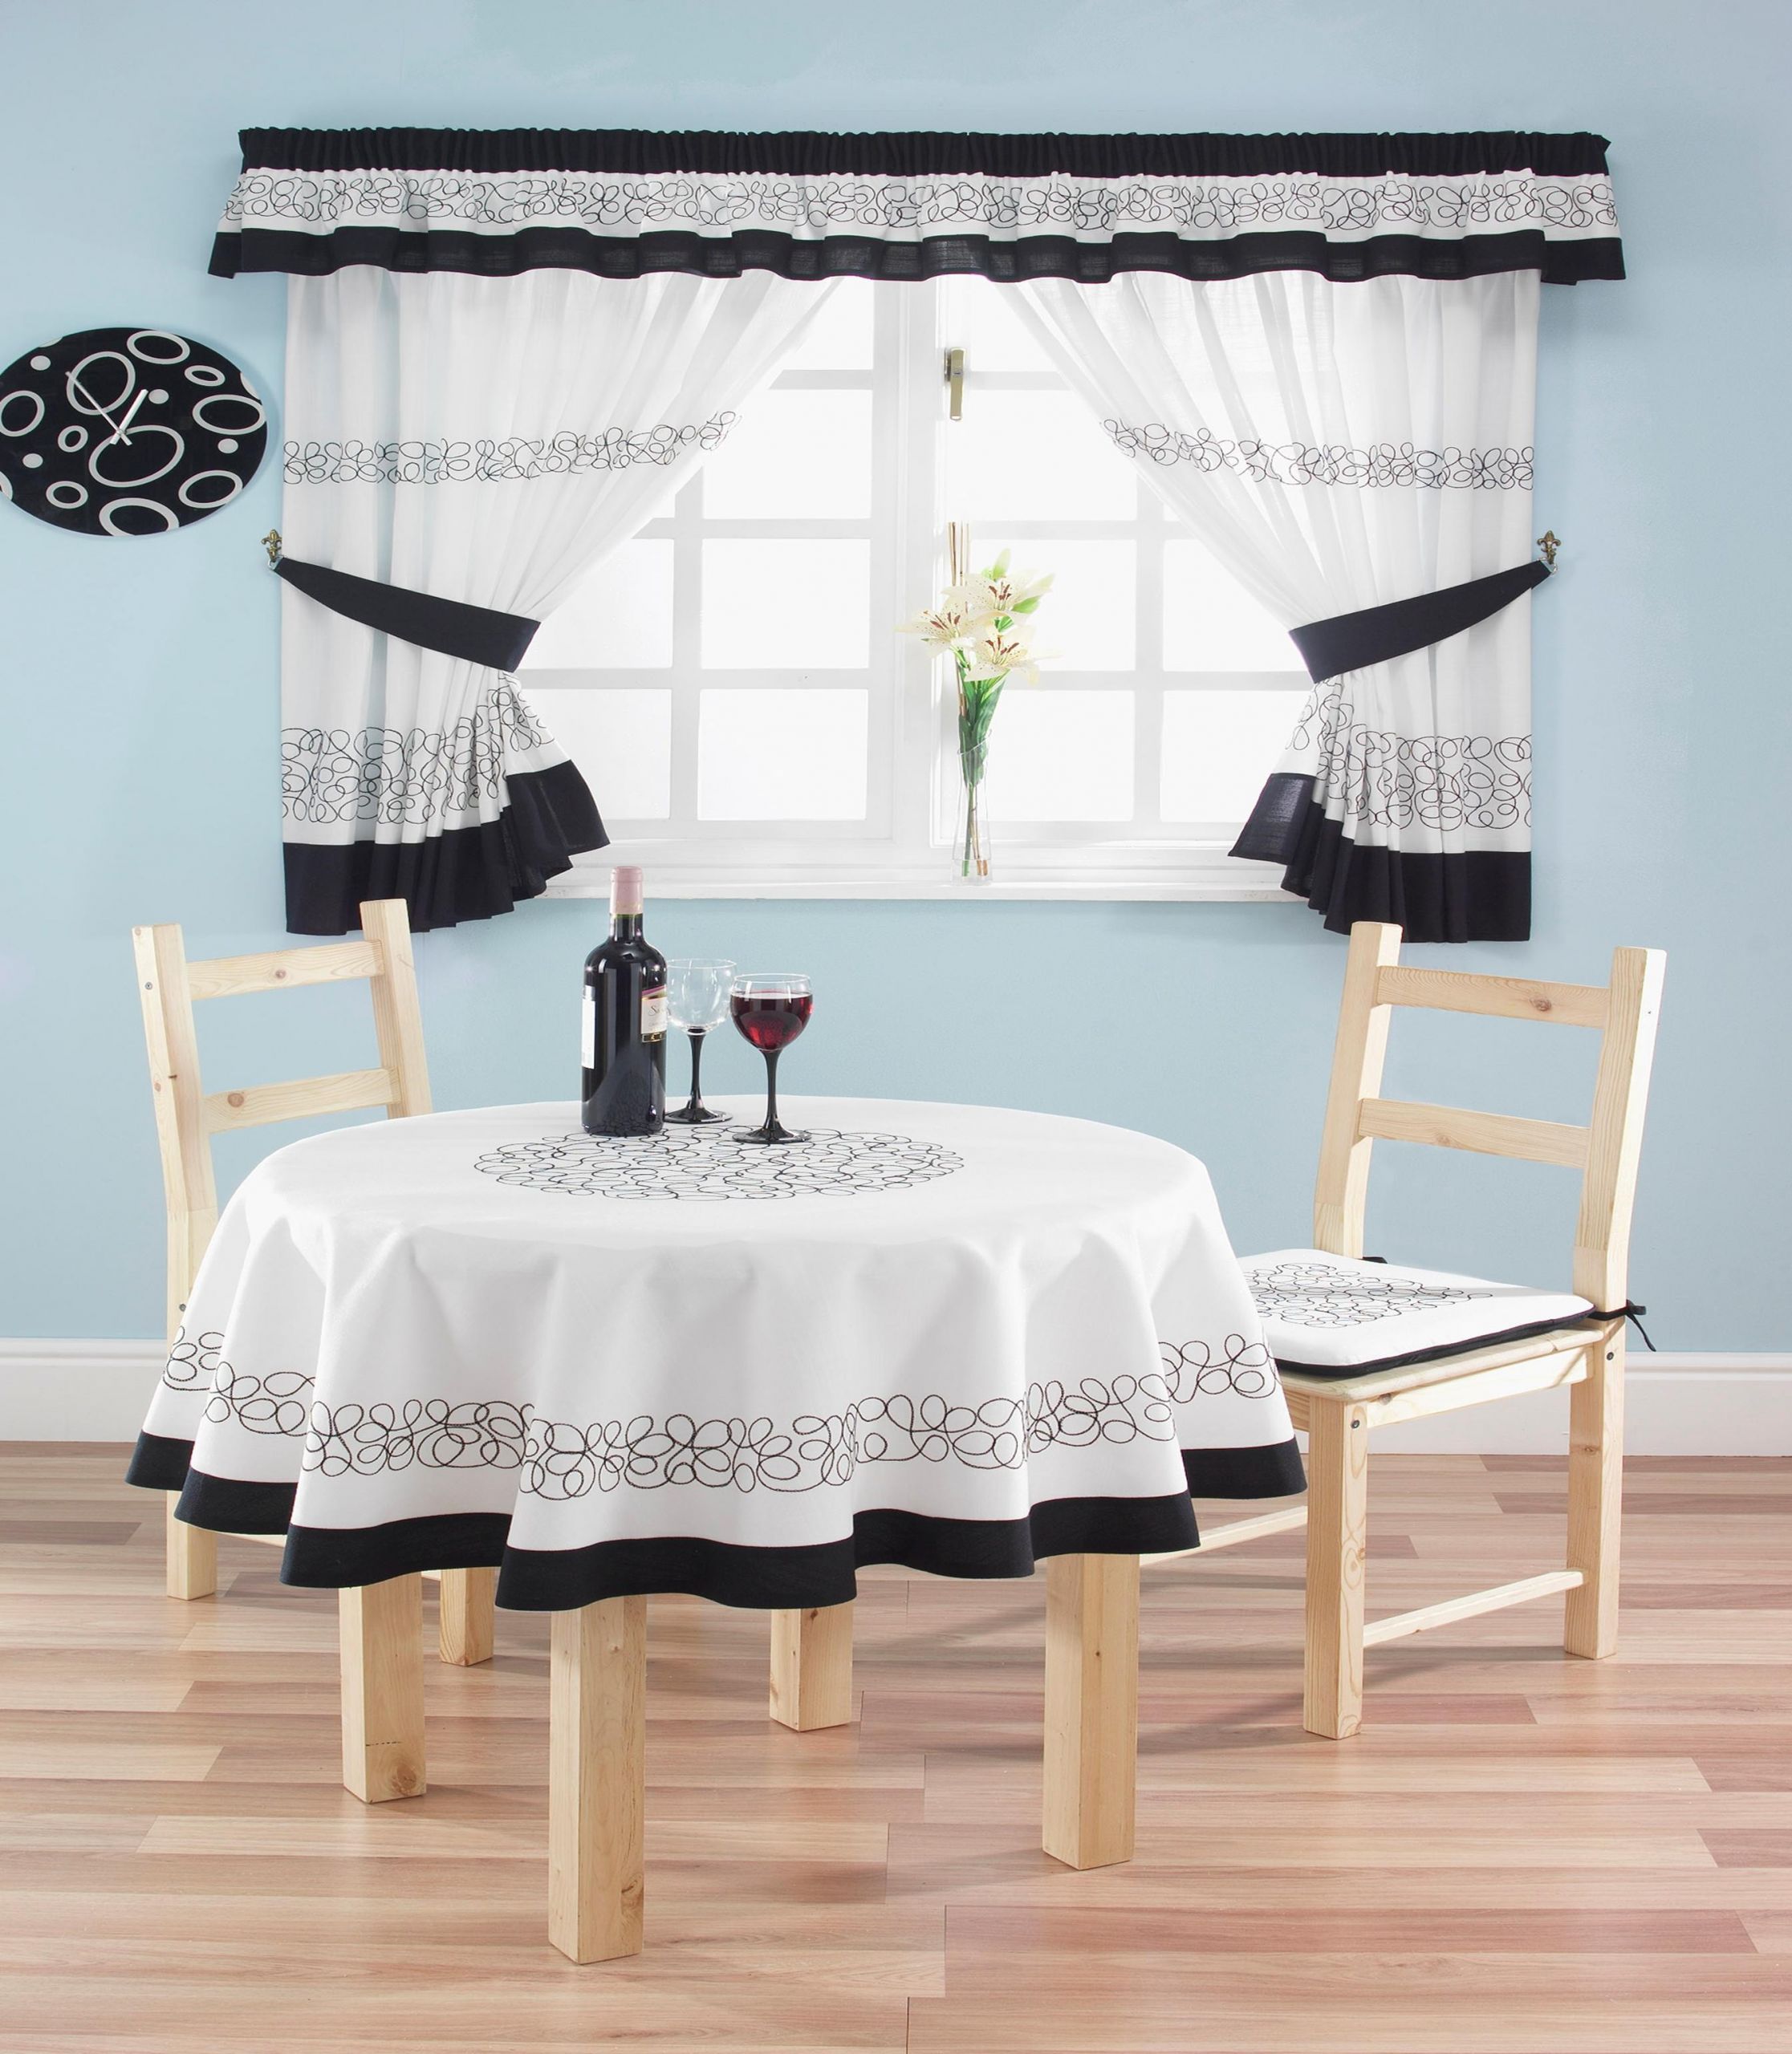 Black Kitchen Curtains
 Modern Country Kitchen Curtains with Tie Backs 66x54